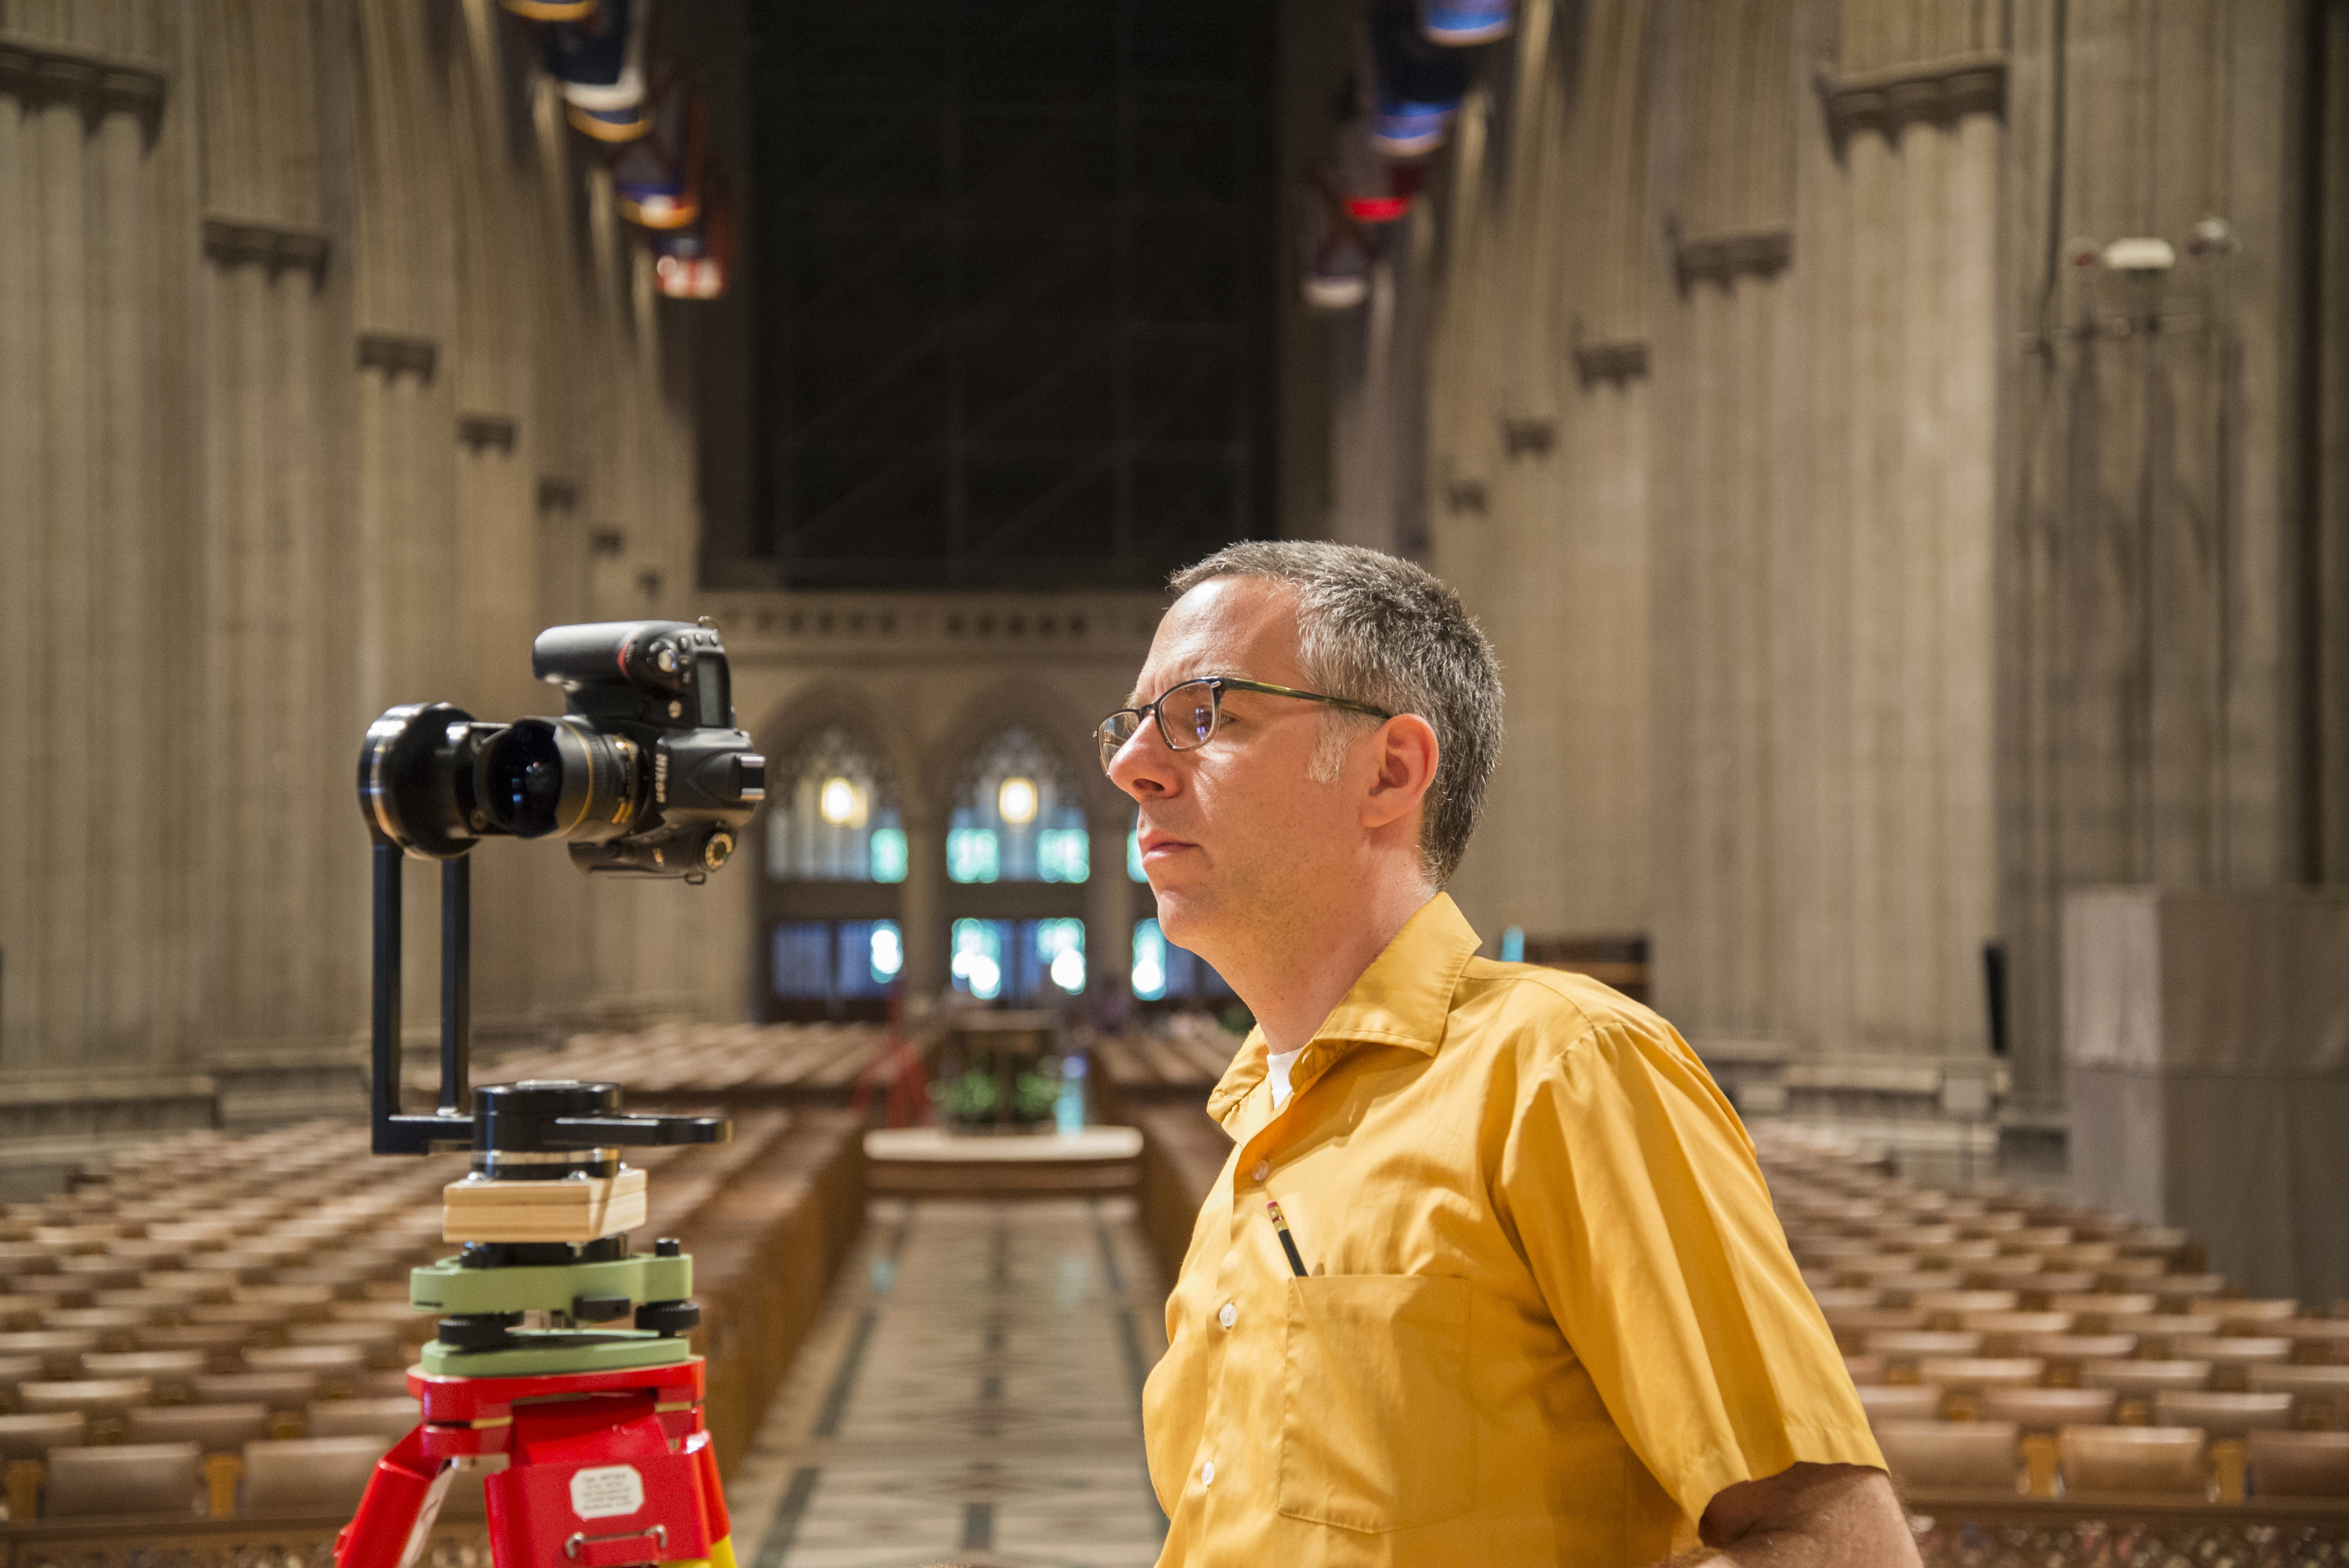 In a nave, a man with short dark hair, wearing glasses and a bright yellow short sleeve shirt, is looking intently at a camera view screen with pews in the background.